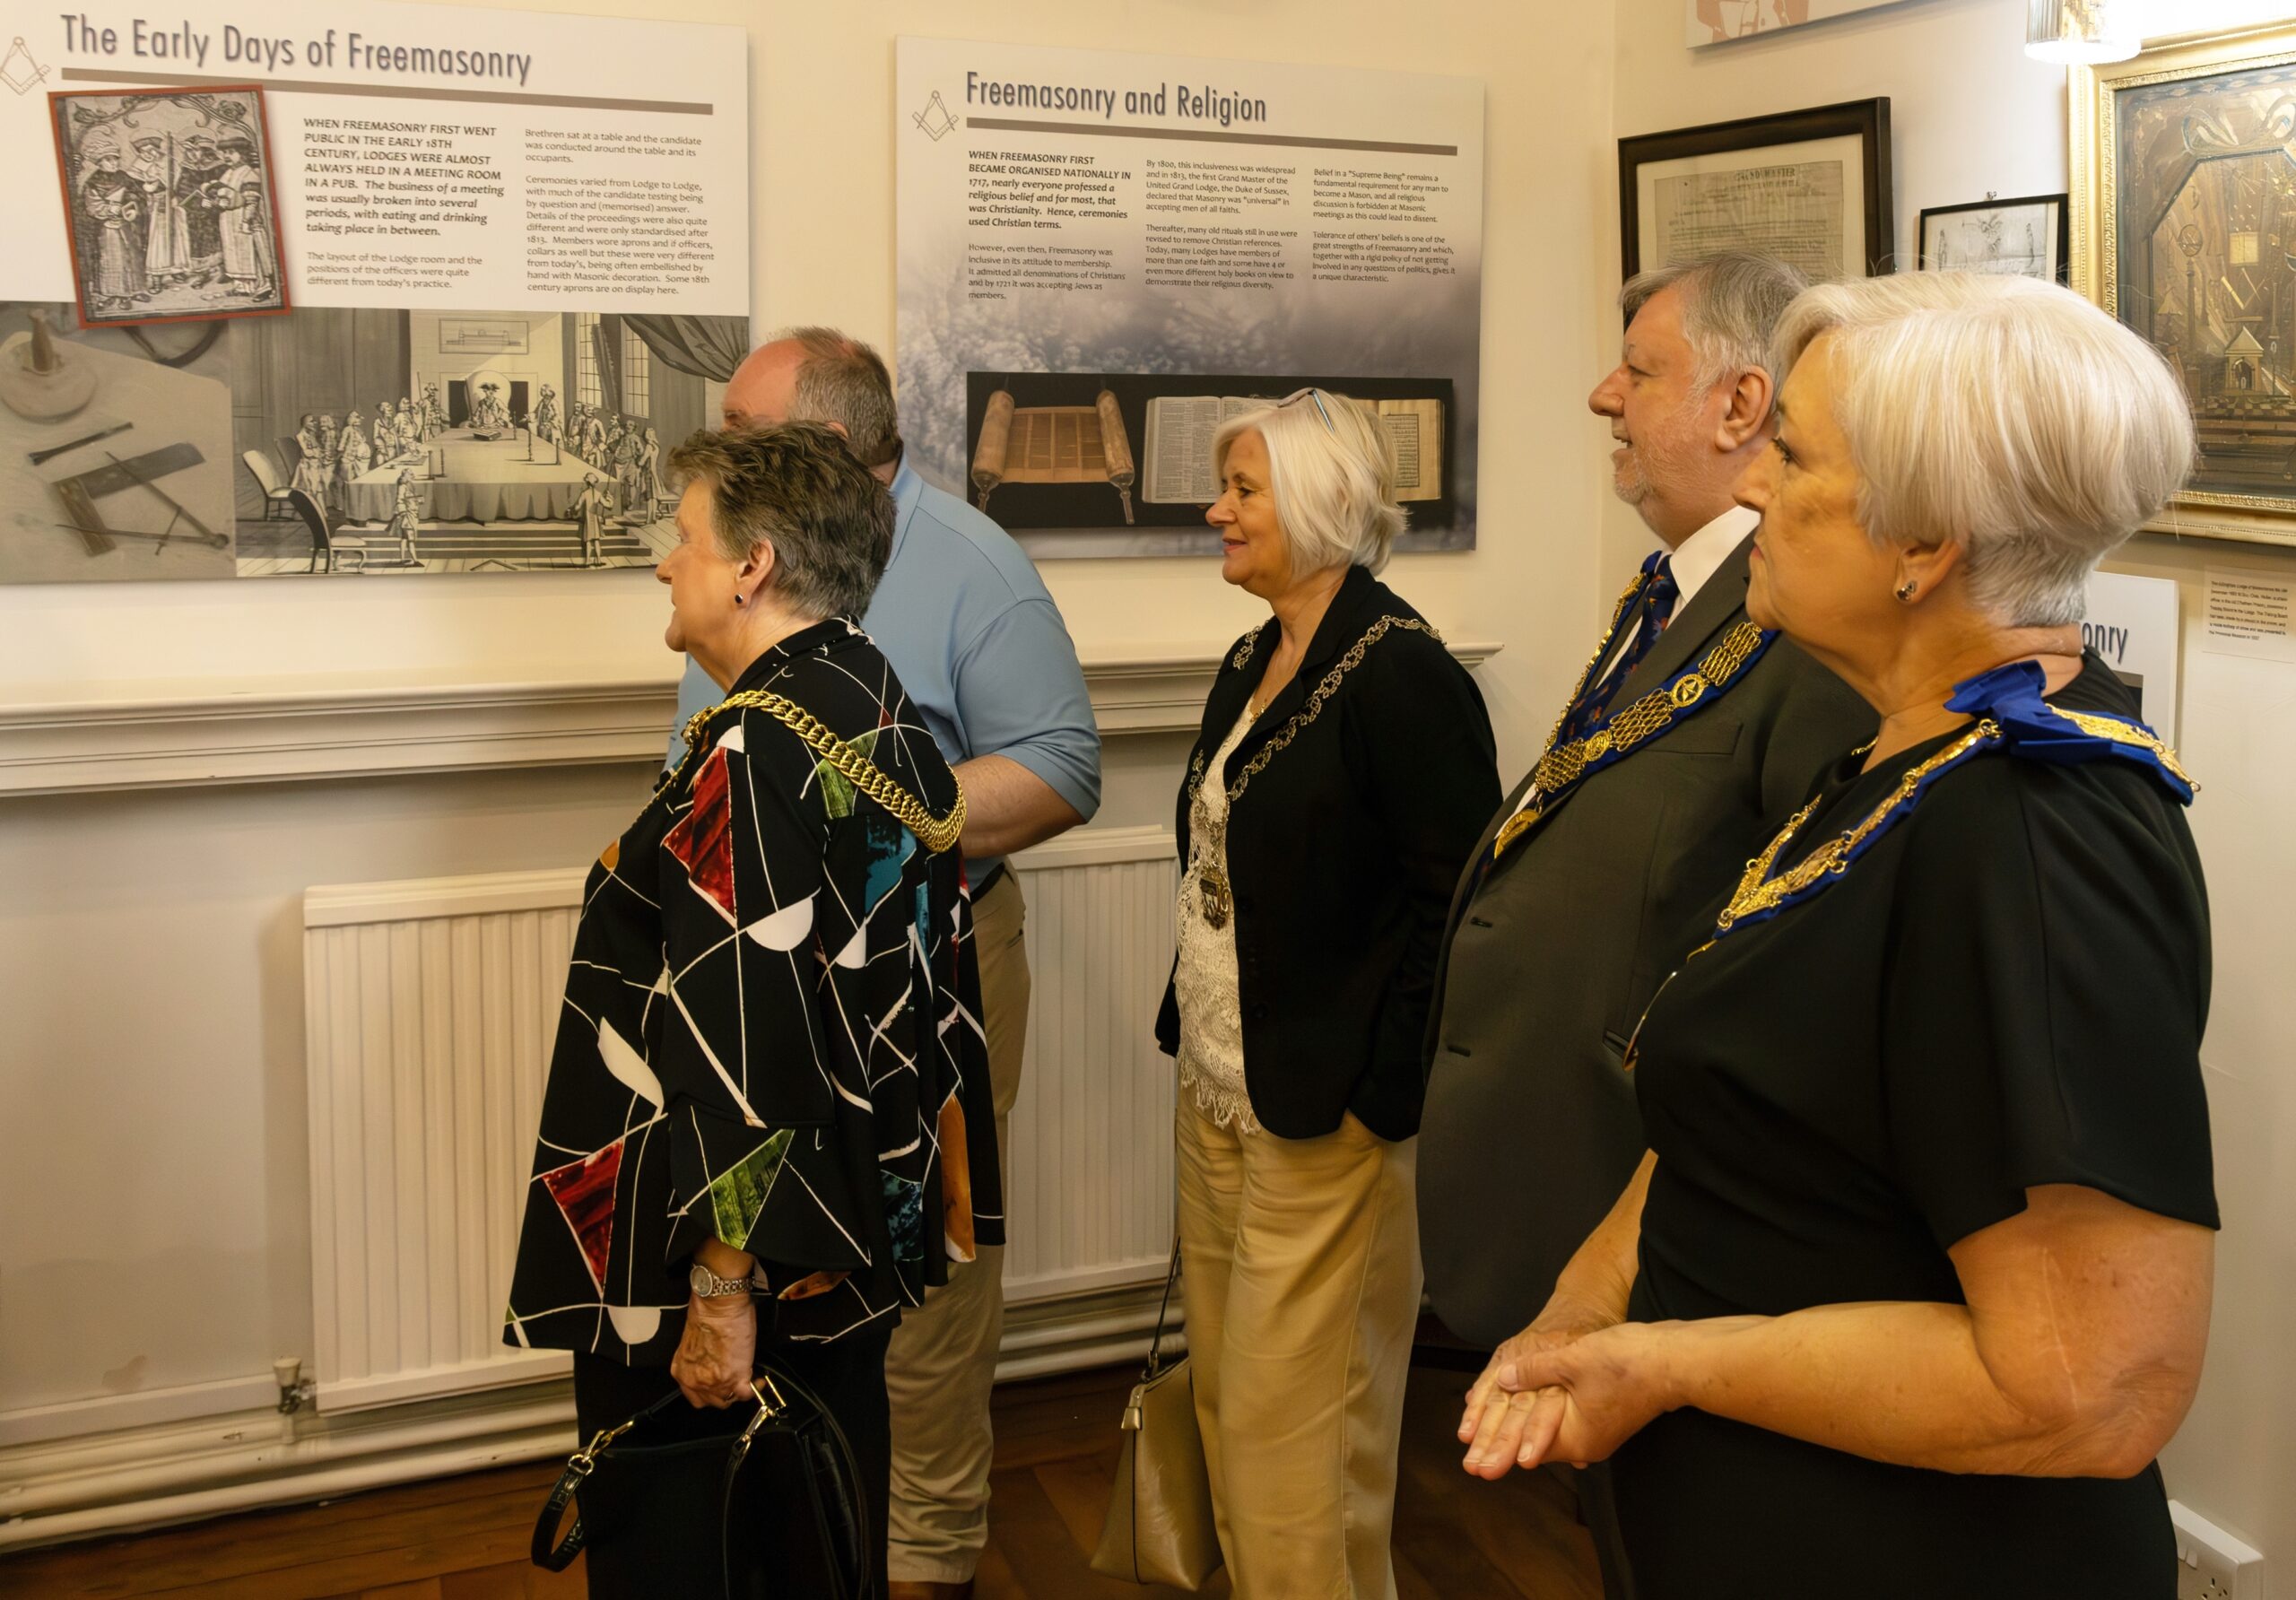 The Lord Mayor and Lady Mayoress of Canterbury, with Philip South (Deputy Grand Master of East Kent, UGLE) and Jacqueline Langdon-Bassett (Grand Inspector for East Kent, OWF), being shown exhibits by Richard White (Trustee, and Secretary of the Trust).